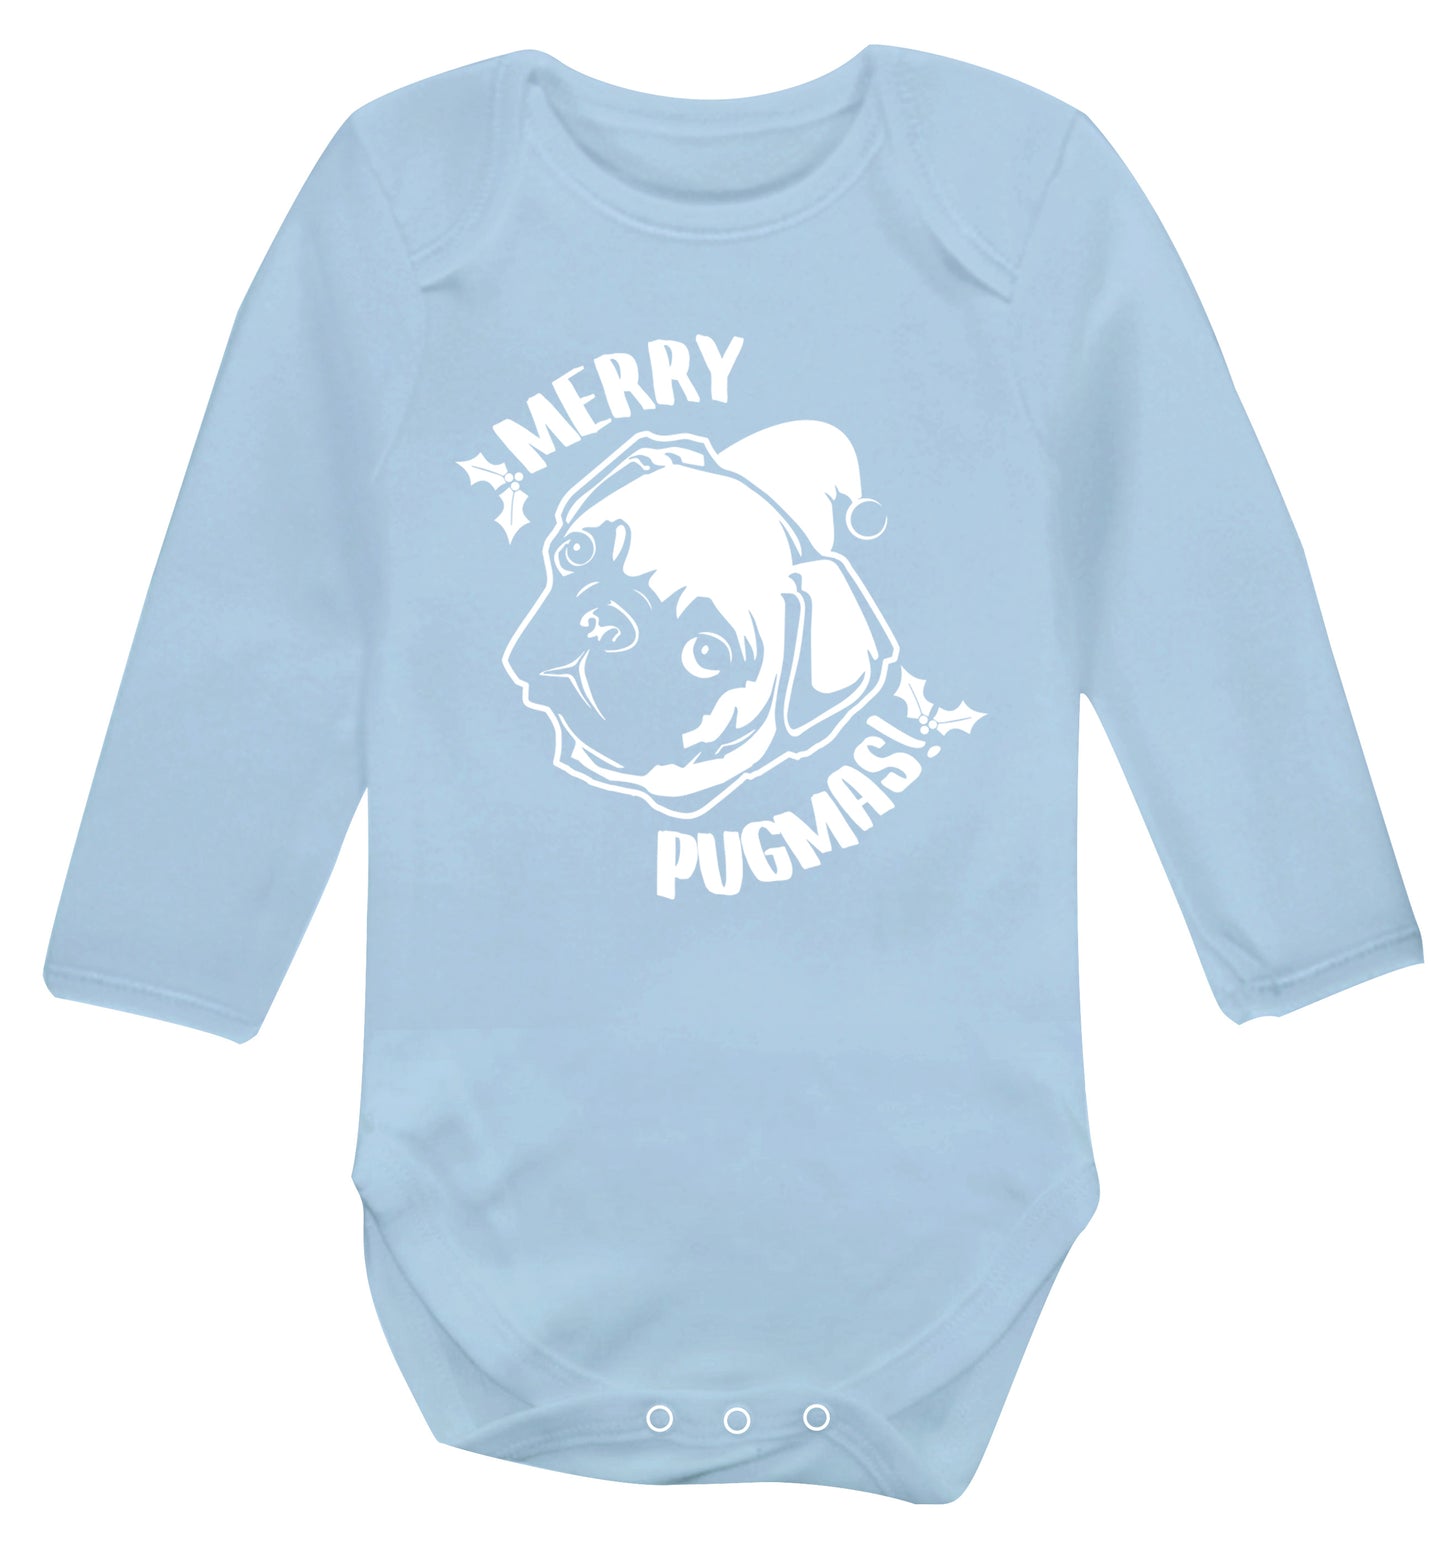 Merry Pugmas Baby Vest long sleeved pale blue 6-12 months